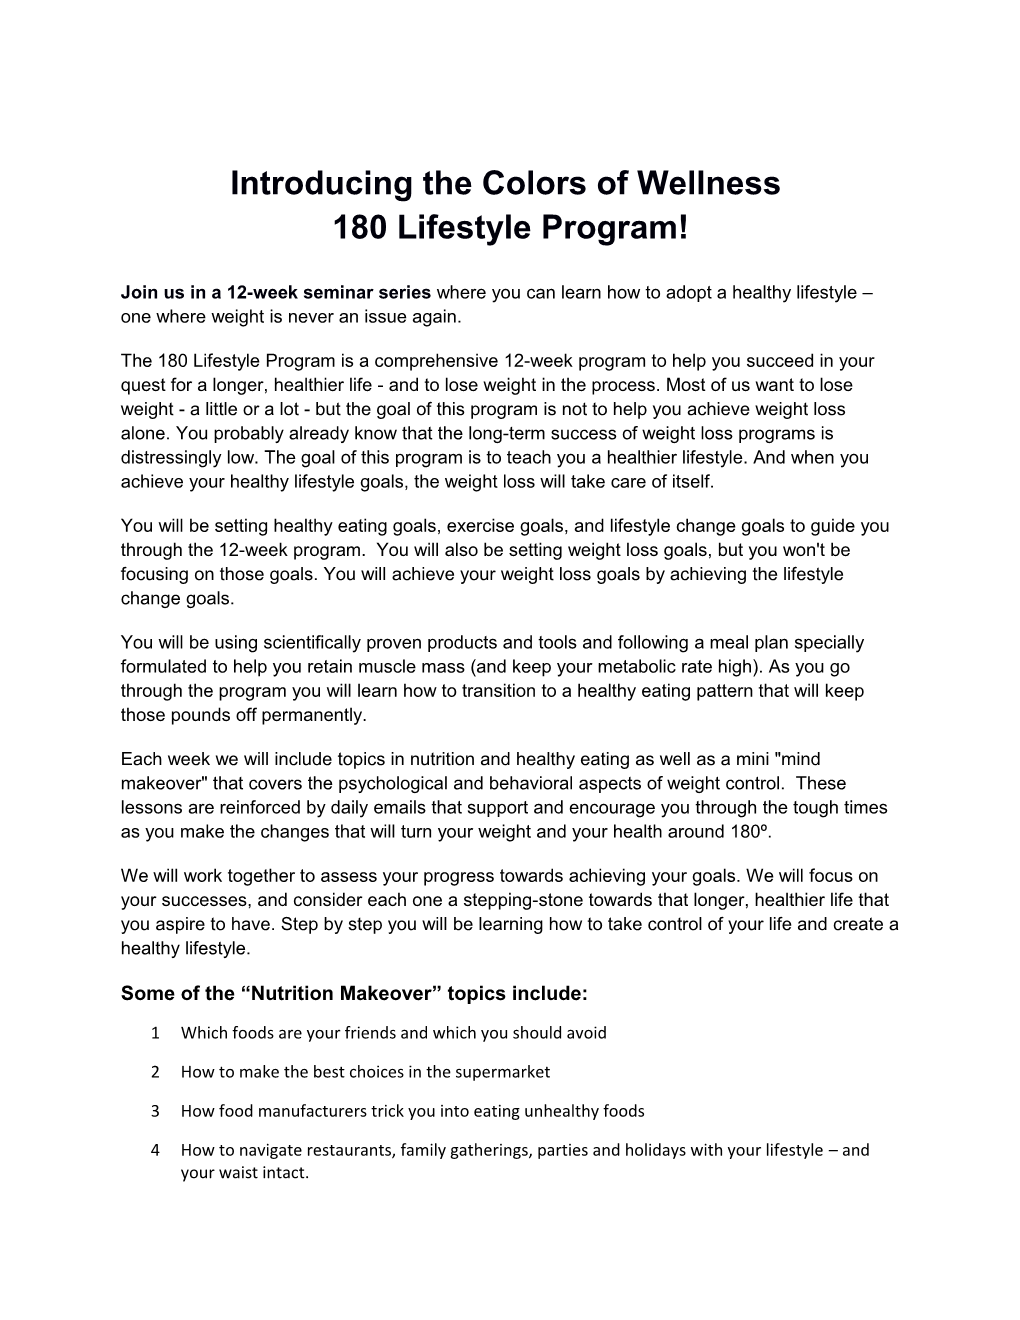 Introducing the Colors of Wellness 180 Lifestyle Program